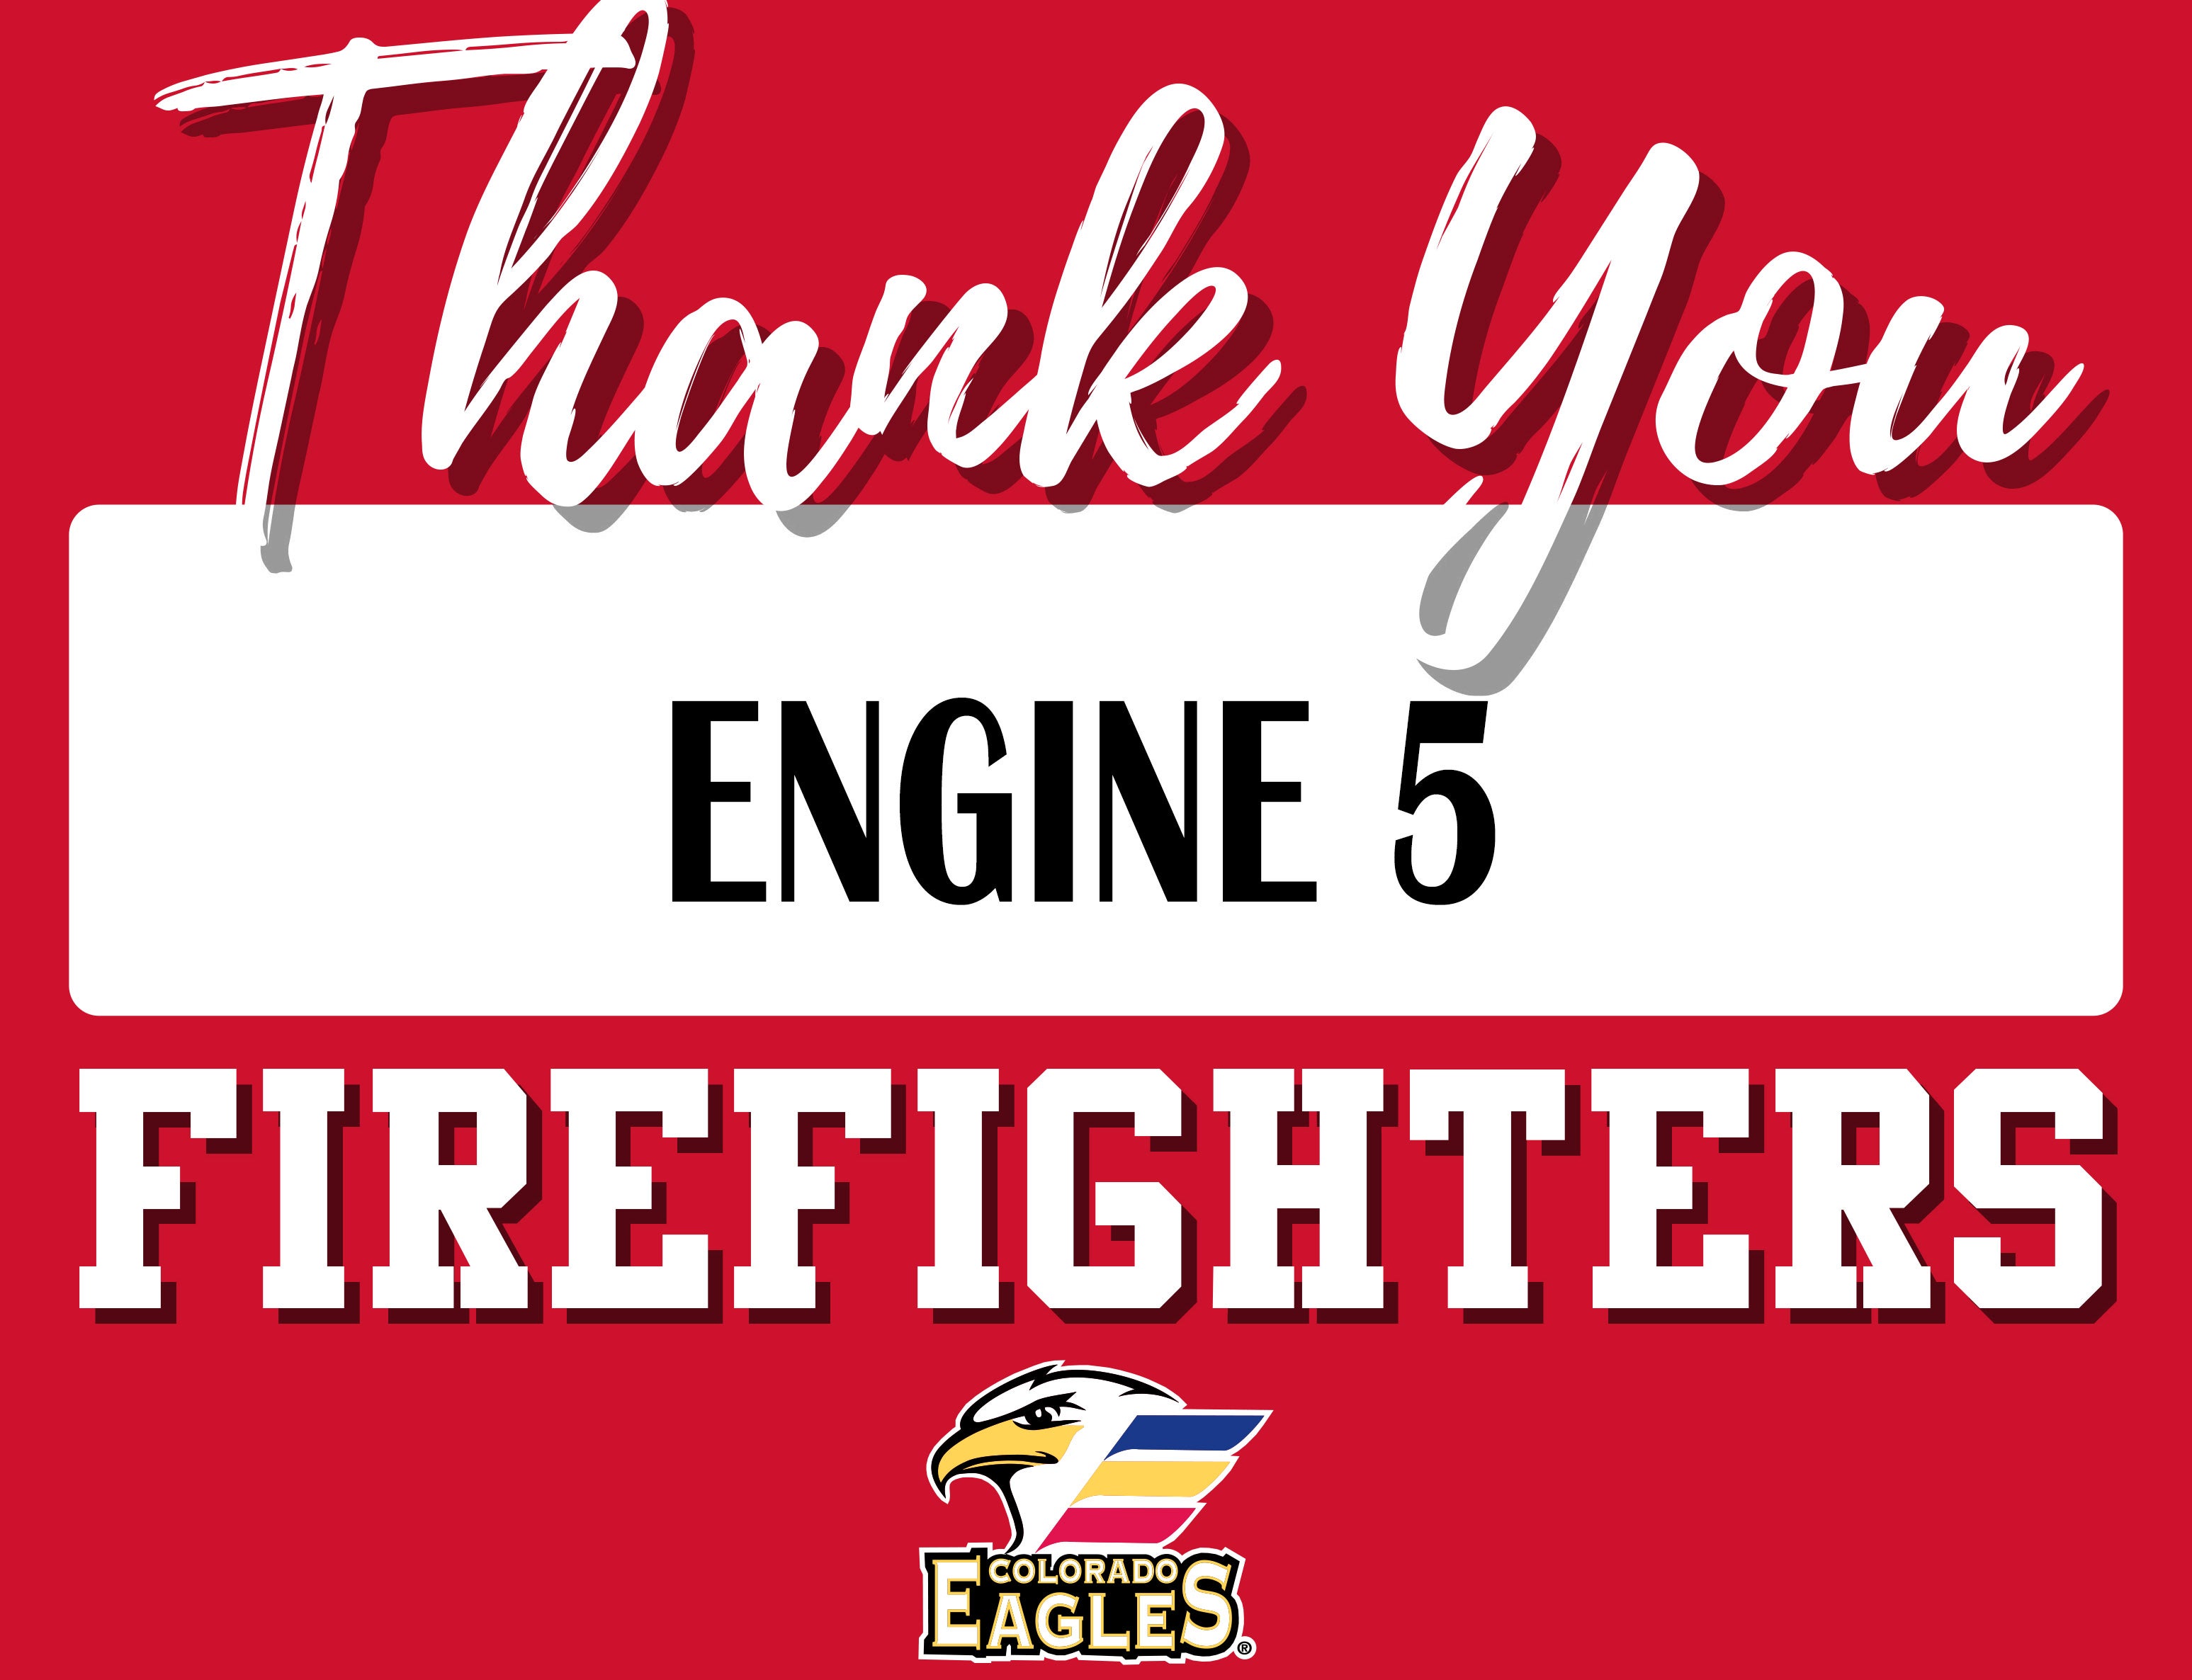 Thank You Firefighters Flyer-2.jpg